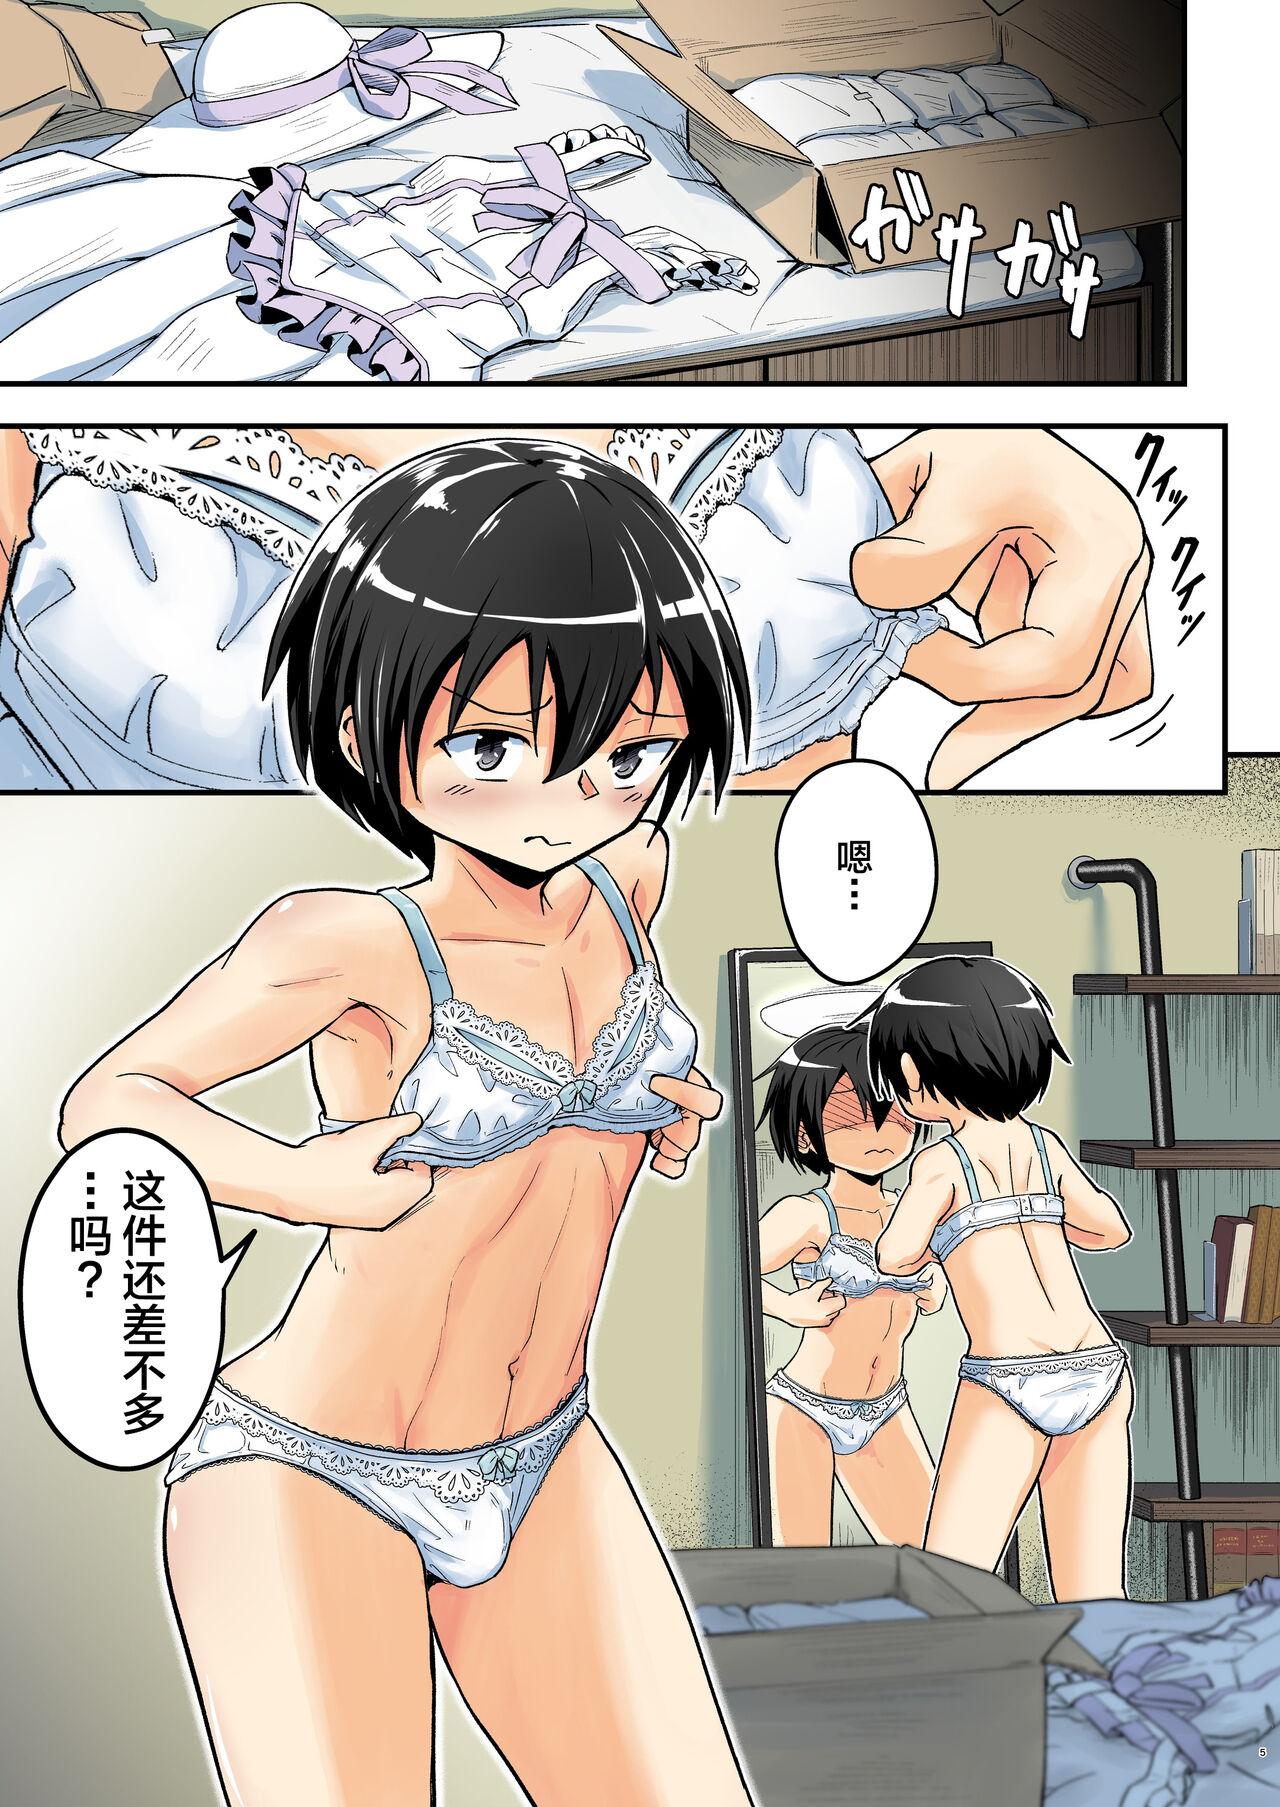 Online Kiriko Route Another #07 - Sword art online Natural Tits - Page 5